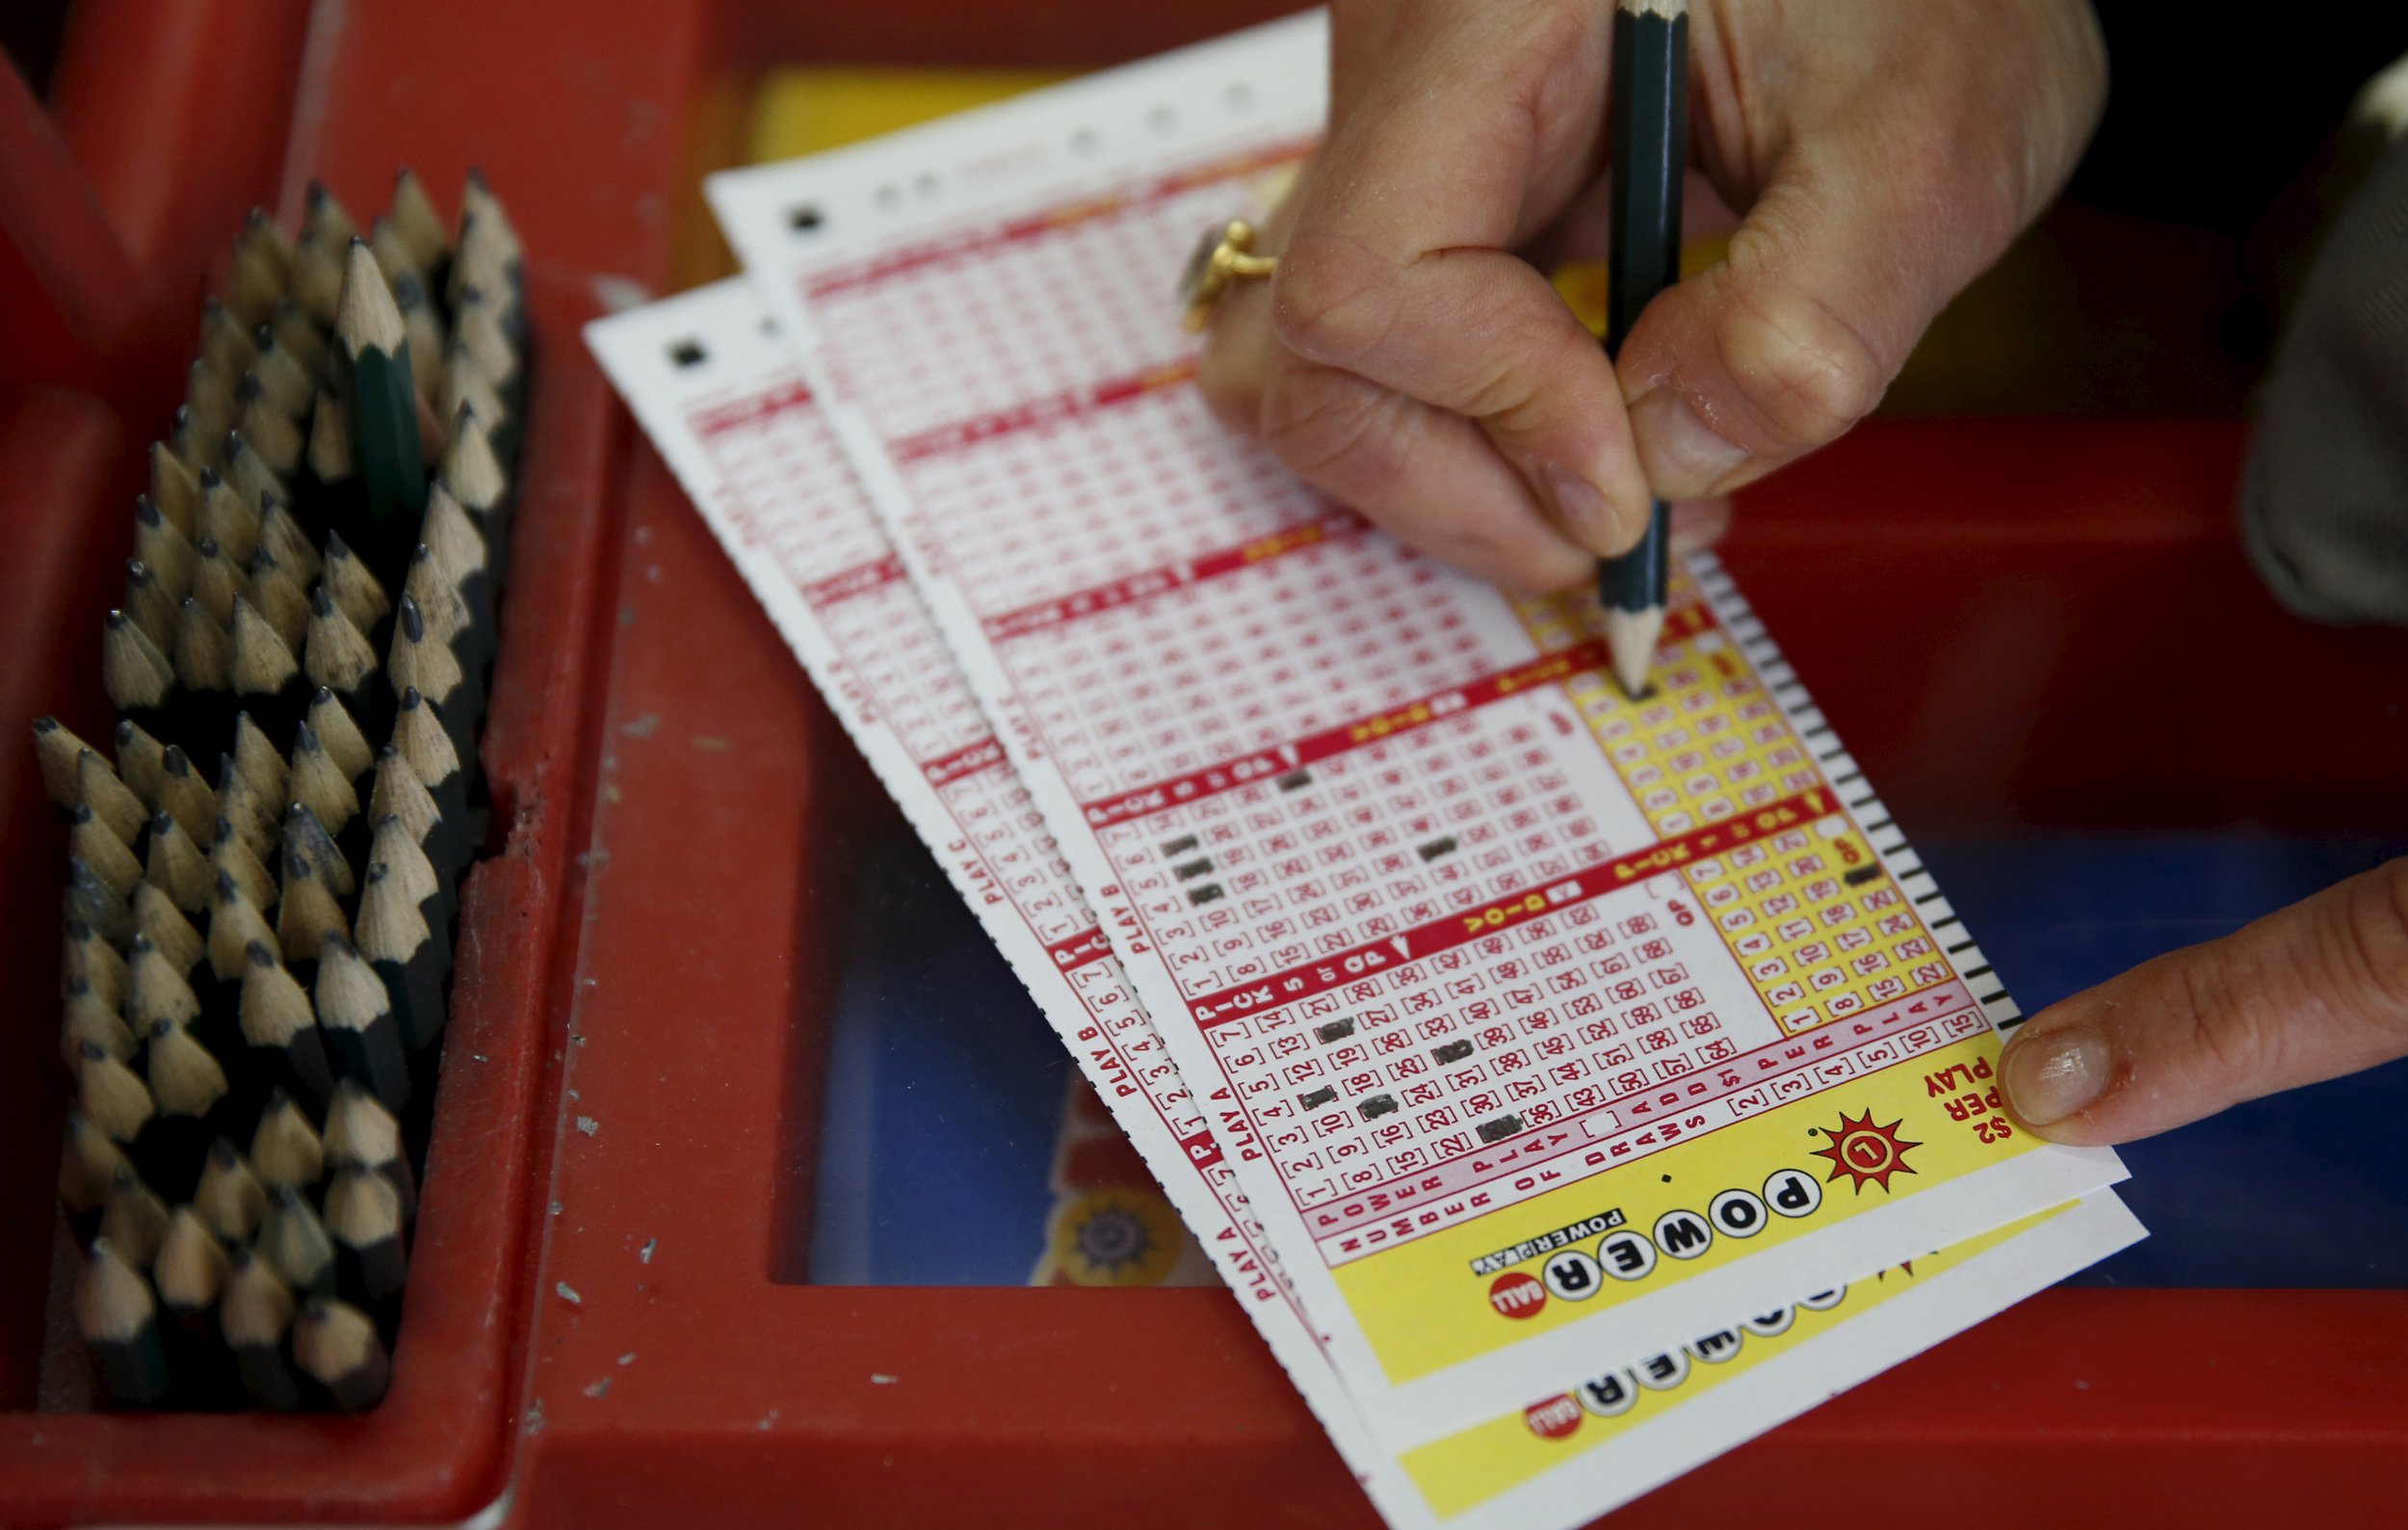 Powerball Drawing Live Stream 2016: Start Time, TV Channel To Watch